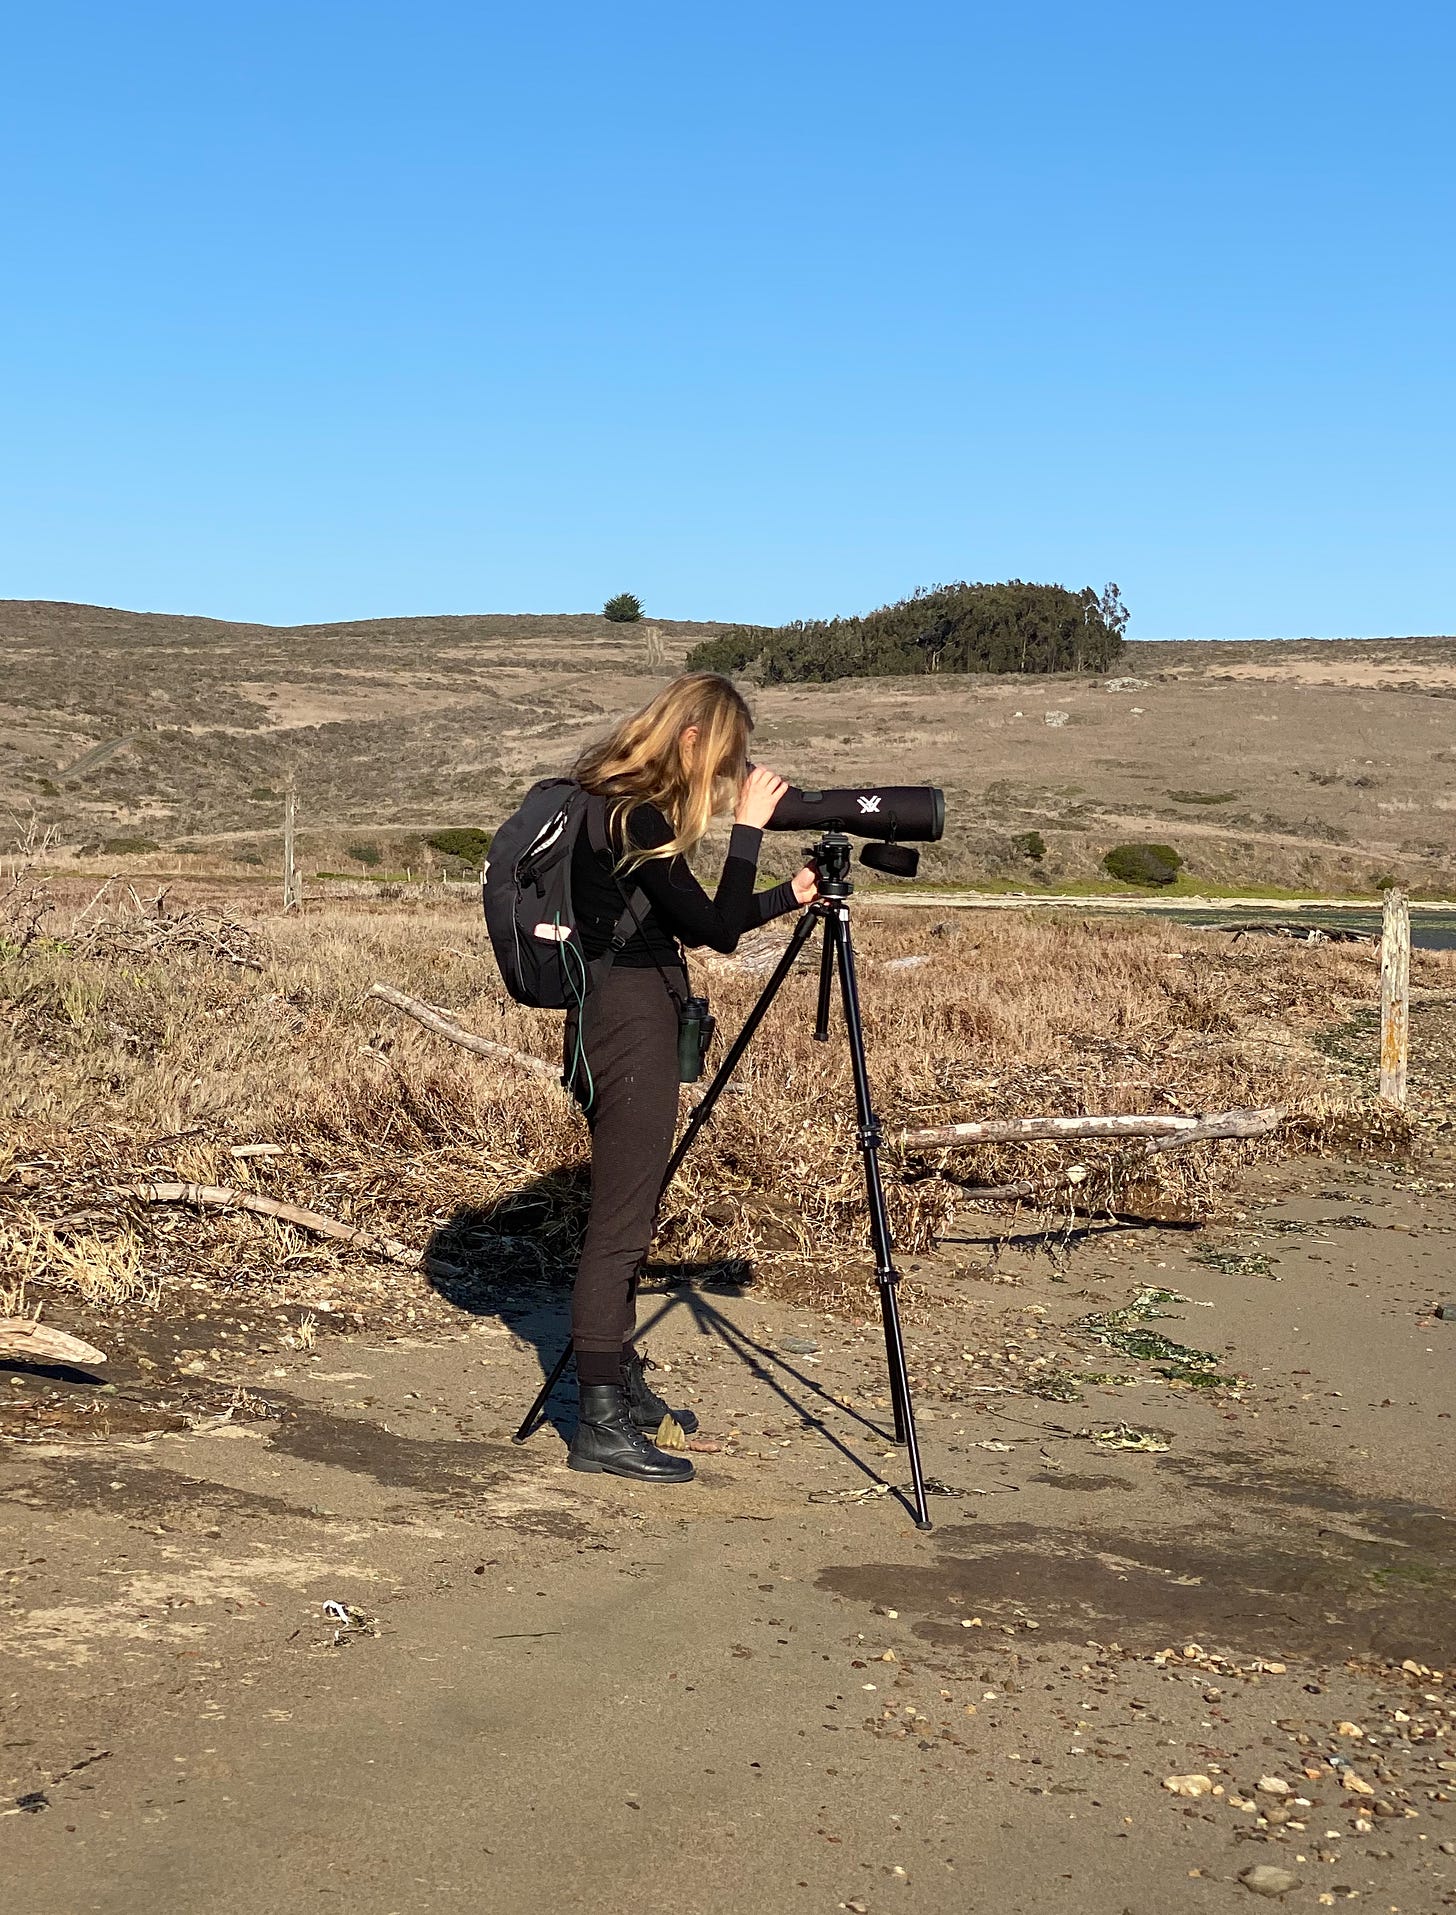 A woman looks through a spotting scope while identifying birds.